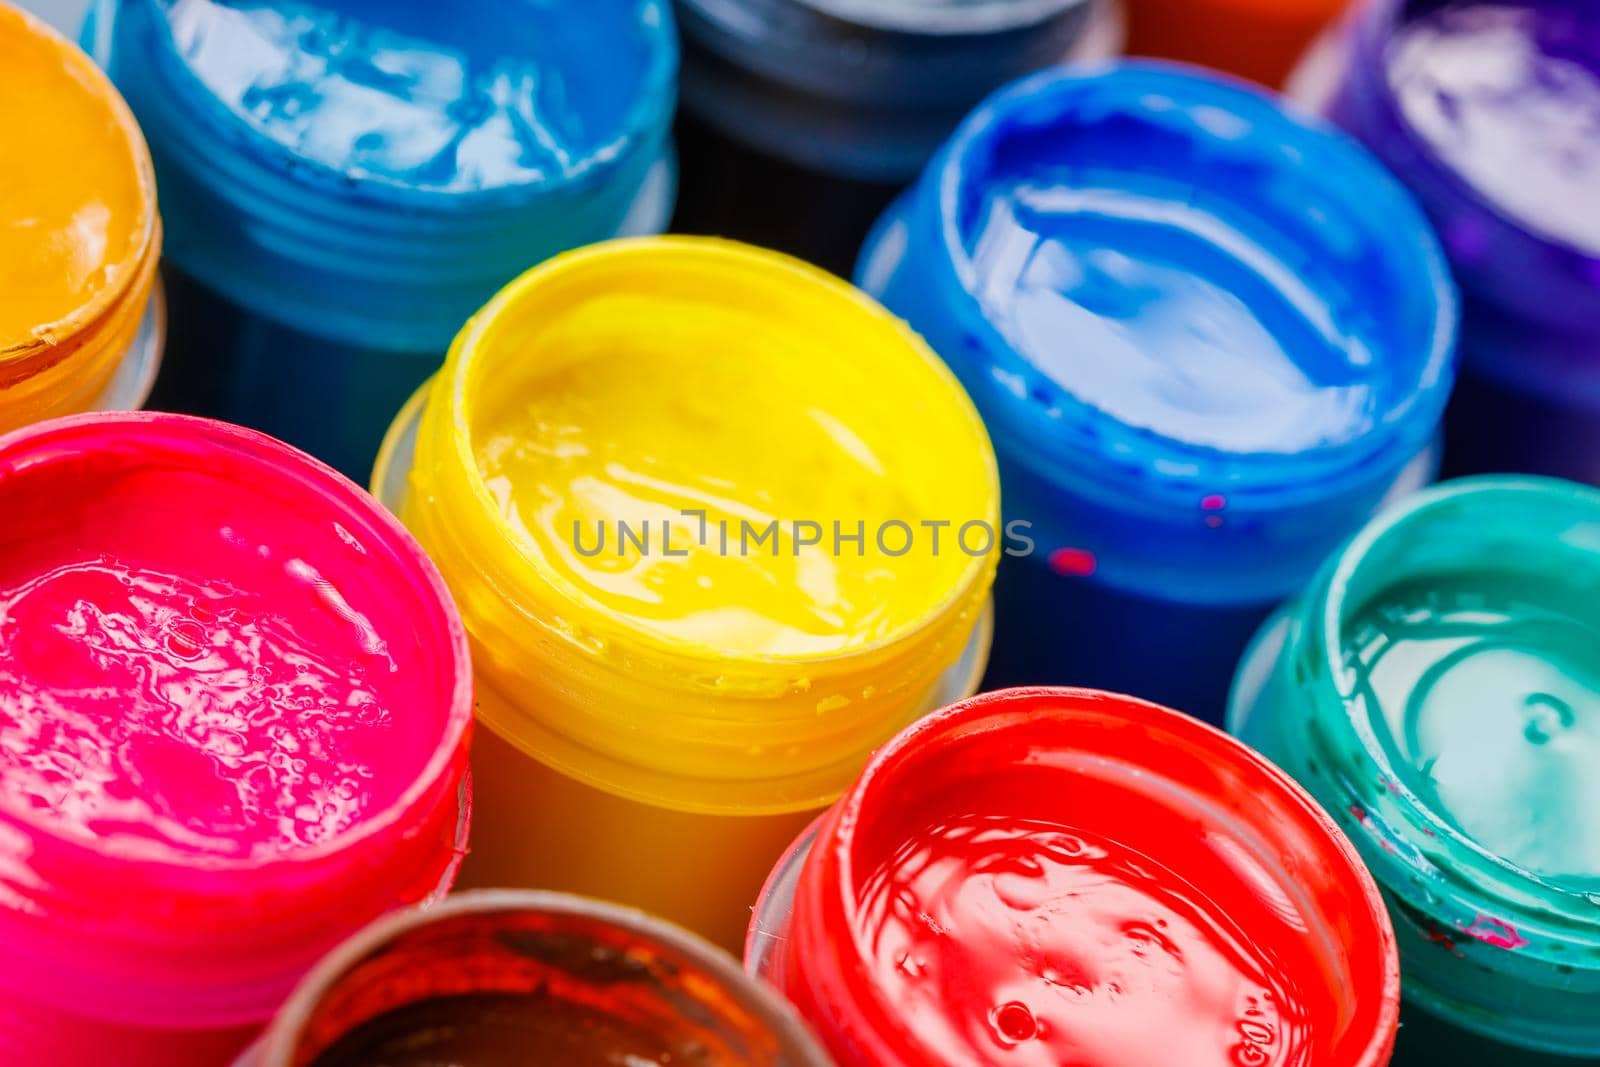 full-frame close-up background of opened small gouache paint jars by z1b